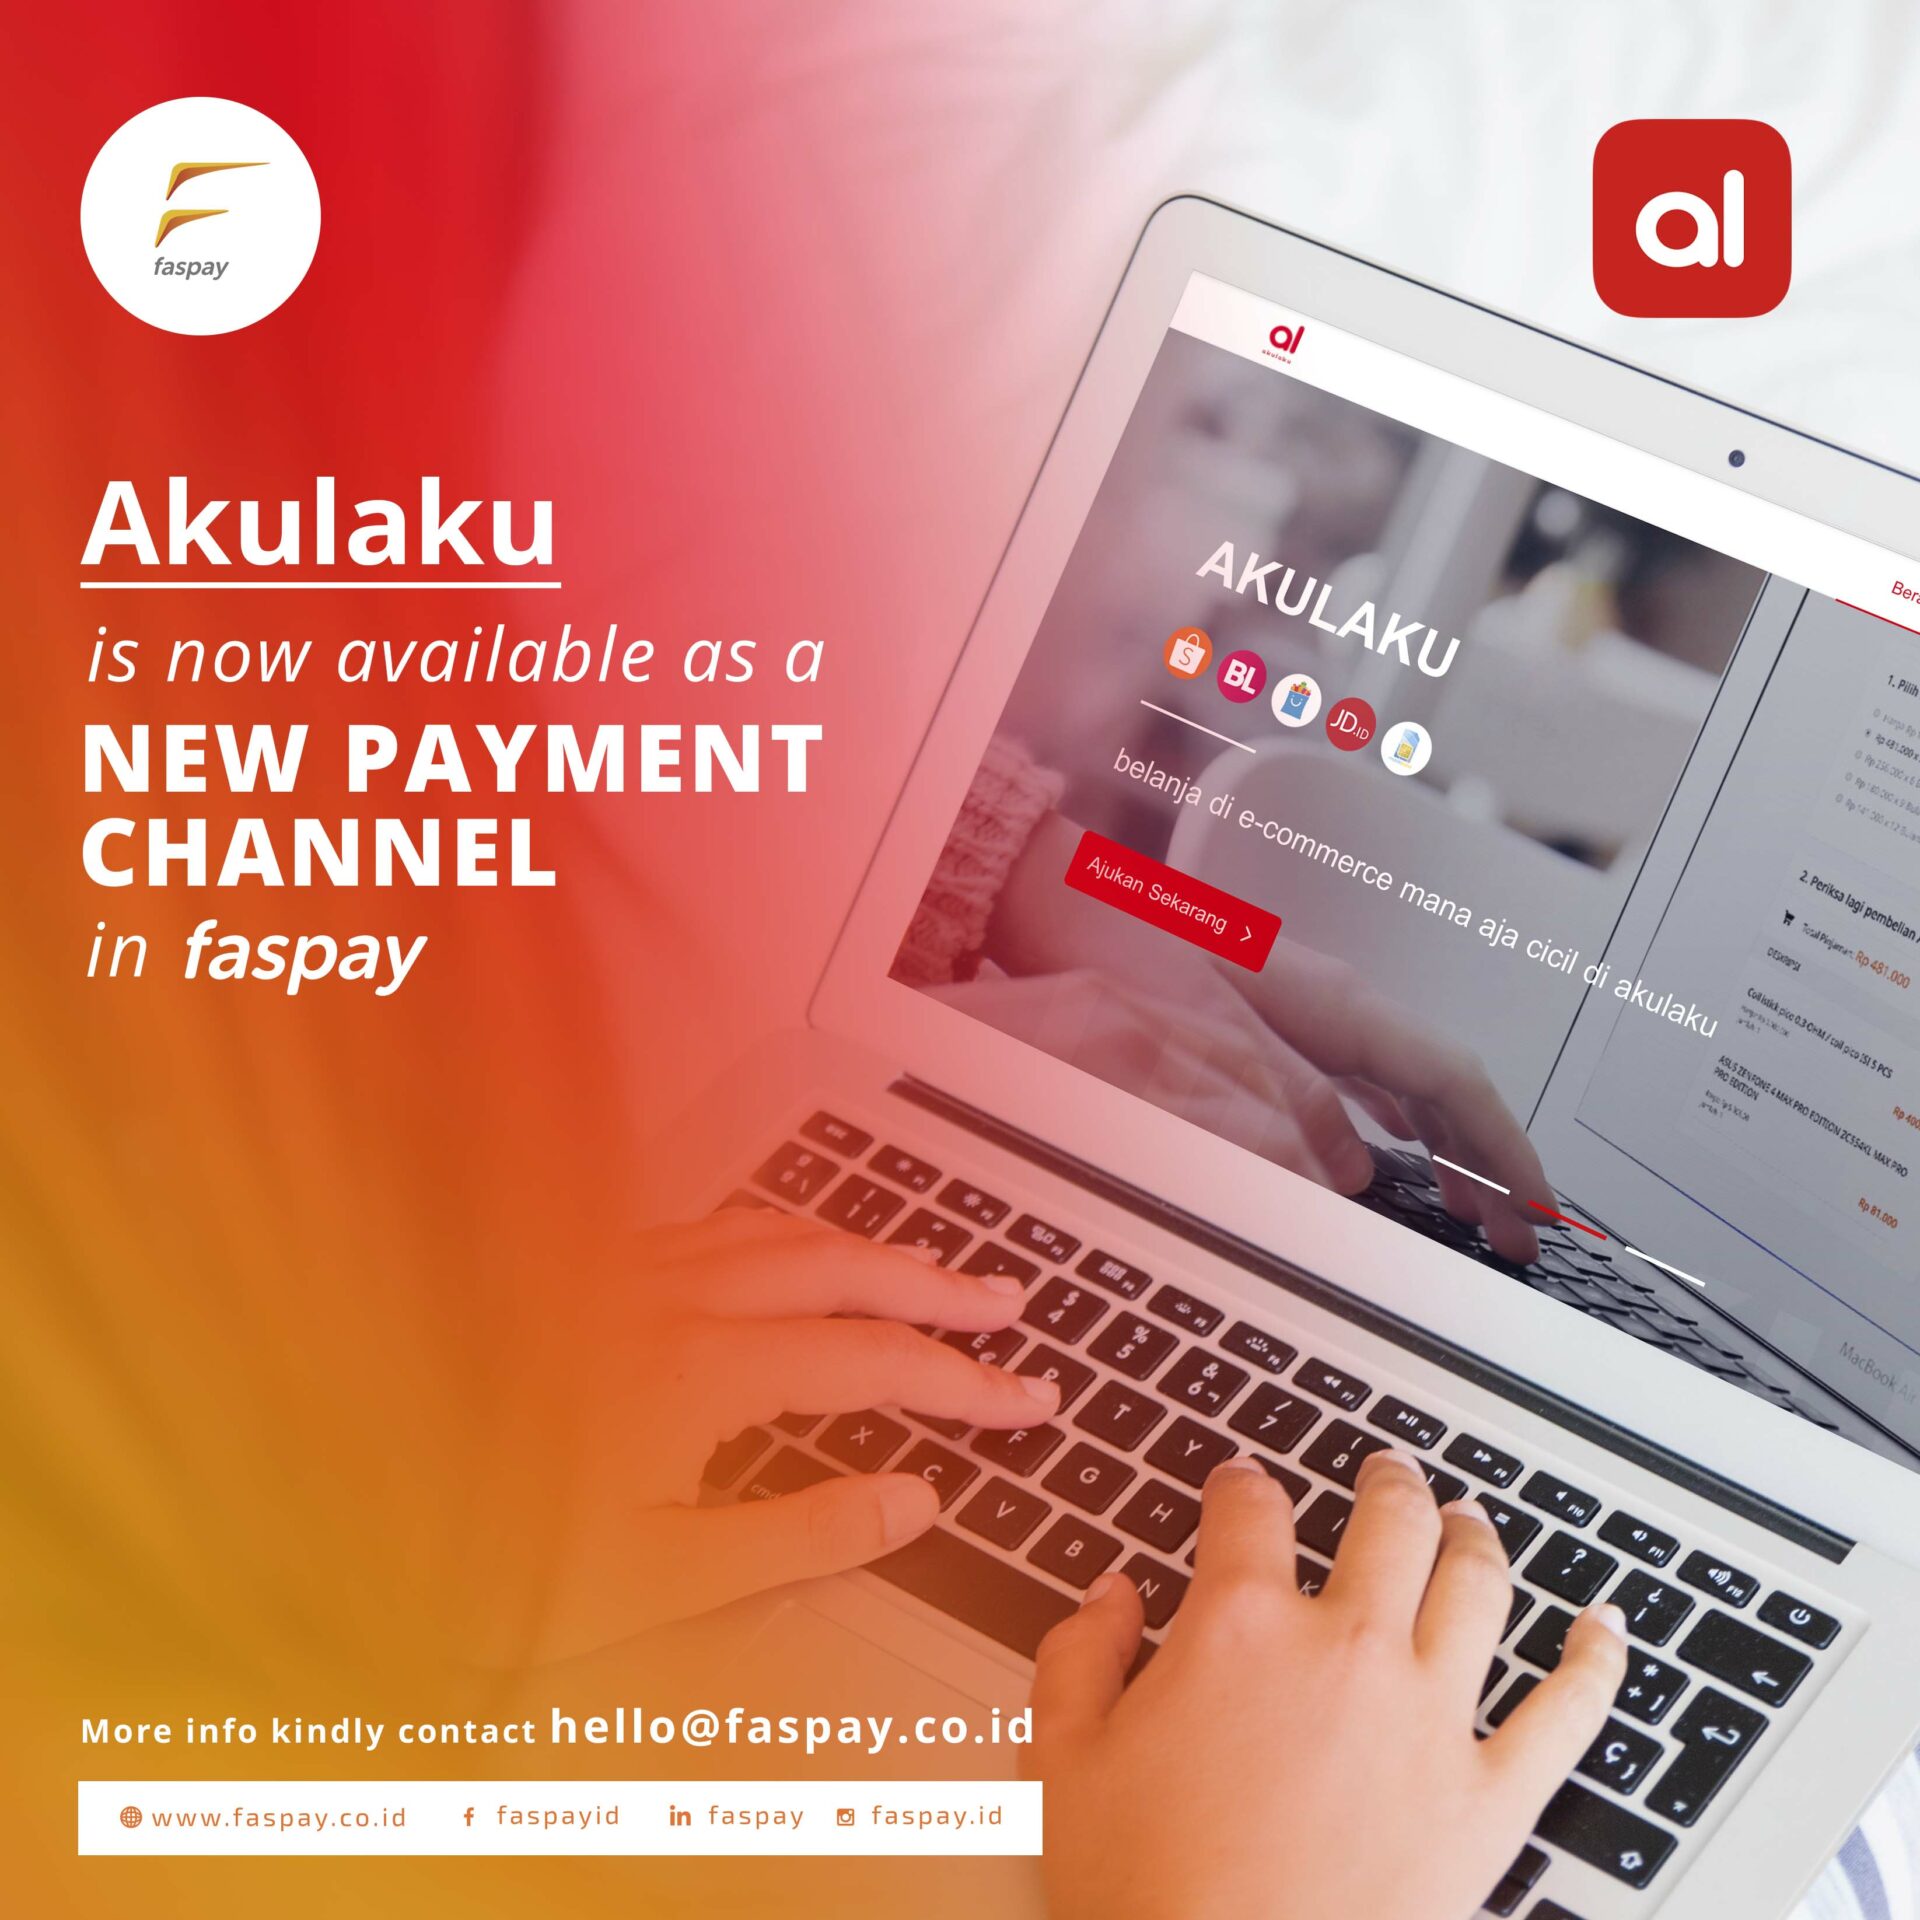 AKULAKU is now available as the Newest Payment Channel in FASPAY!